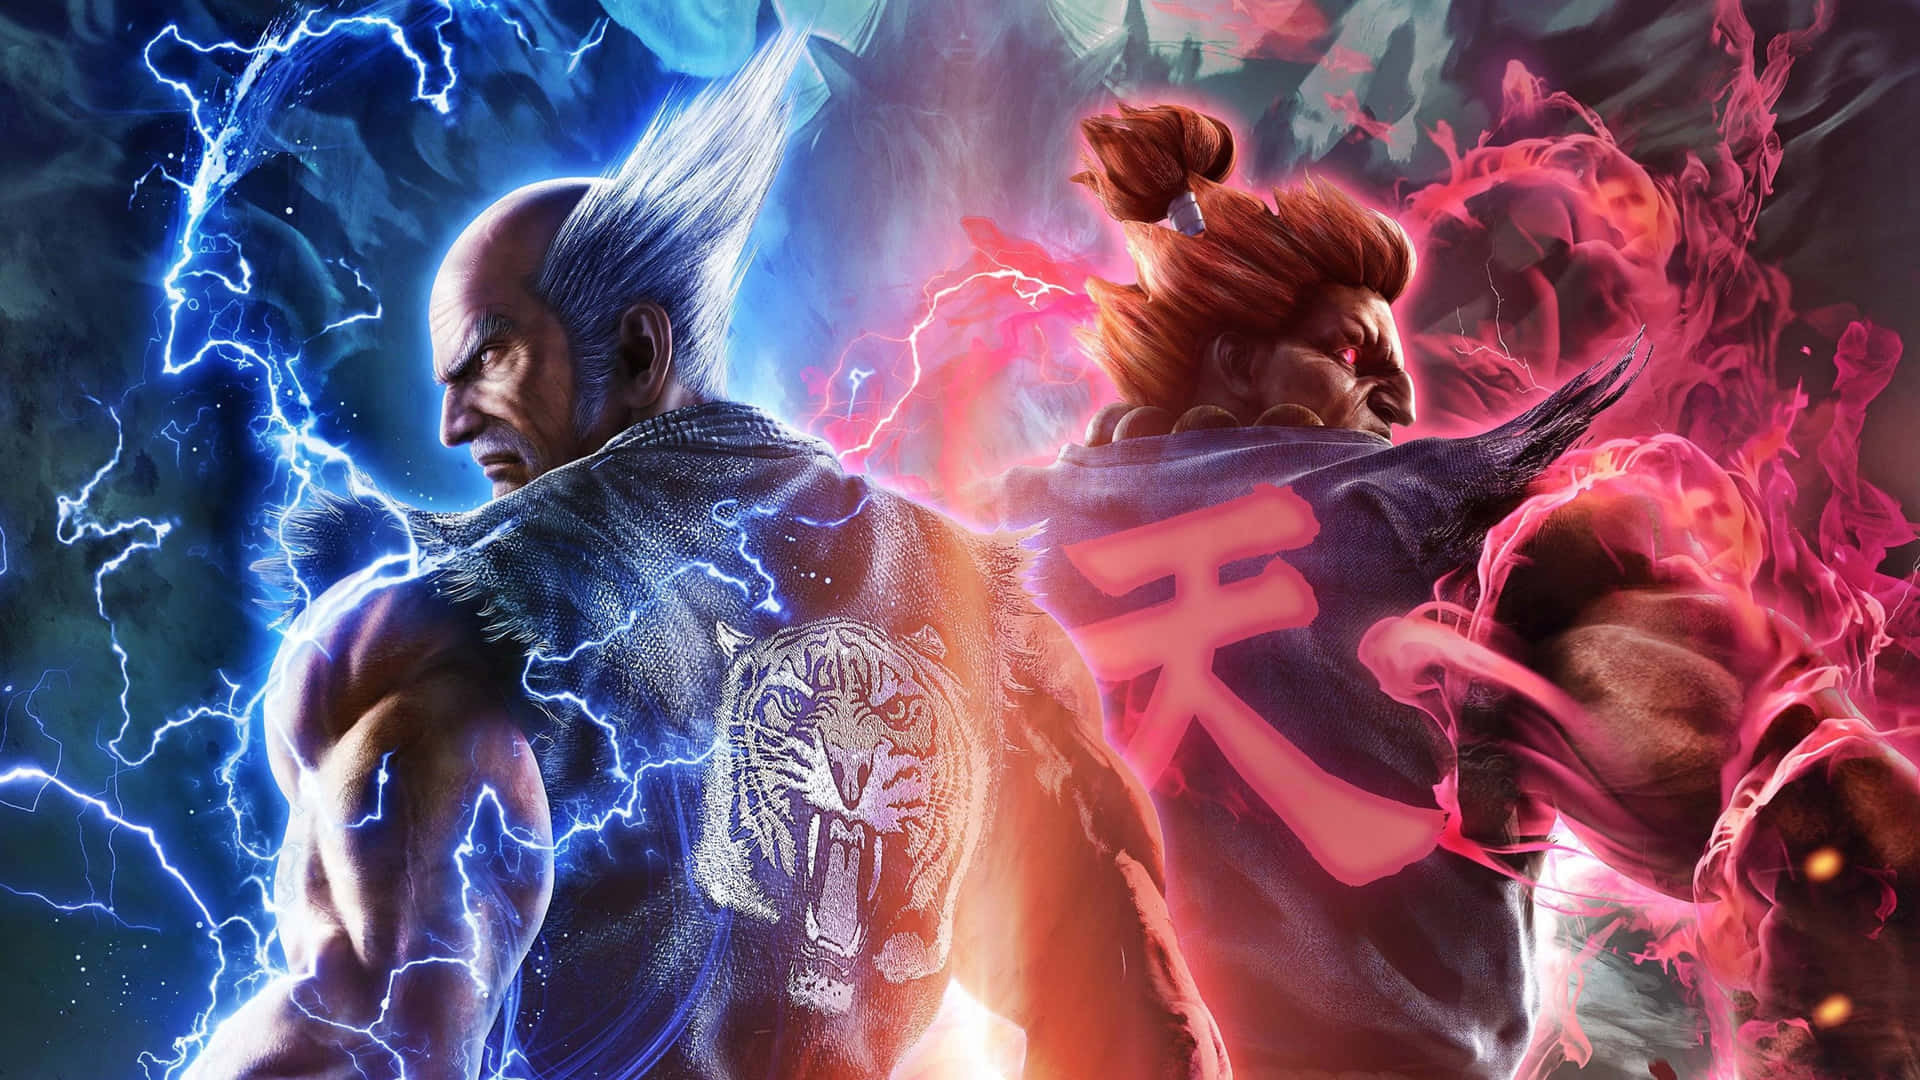 "Test your gaming skills with Street Fighter 4k!" Wallpaper